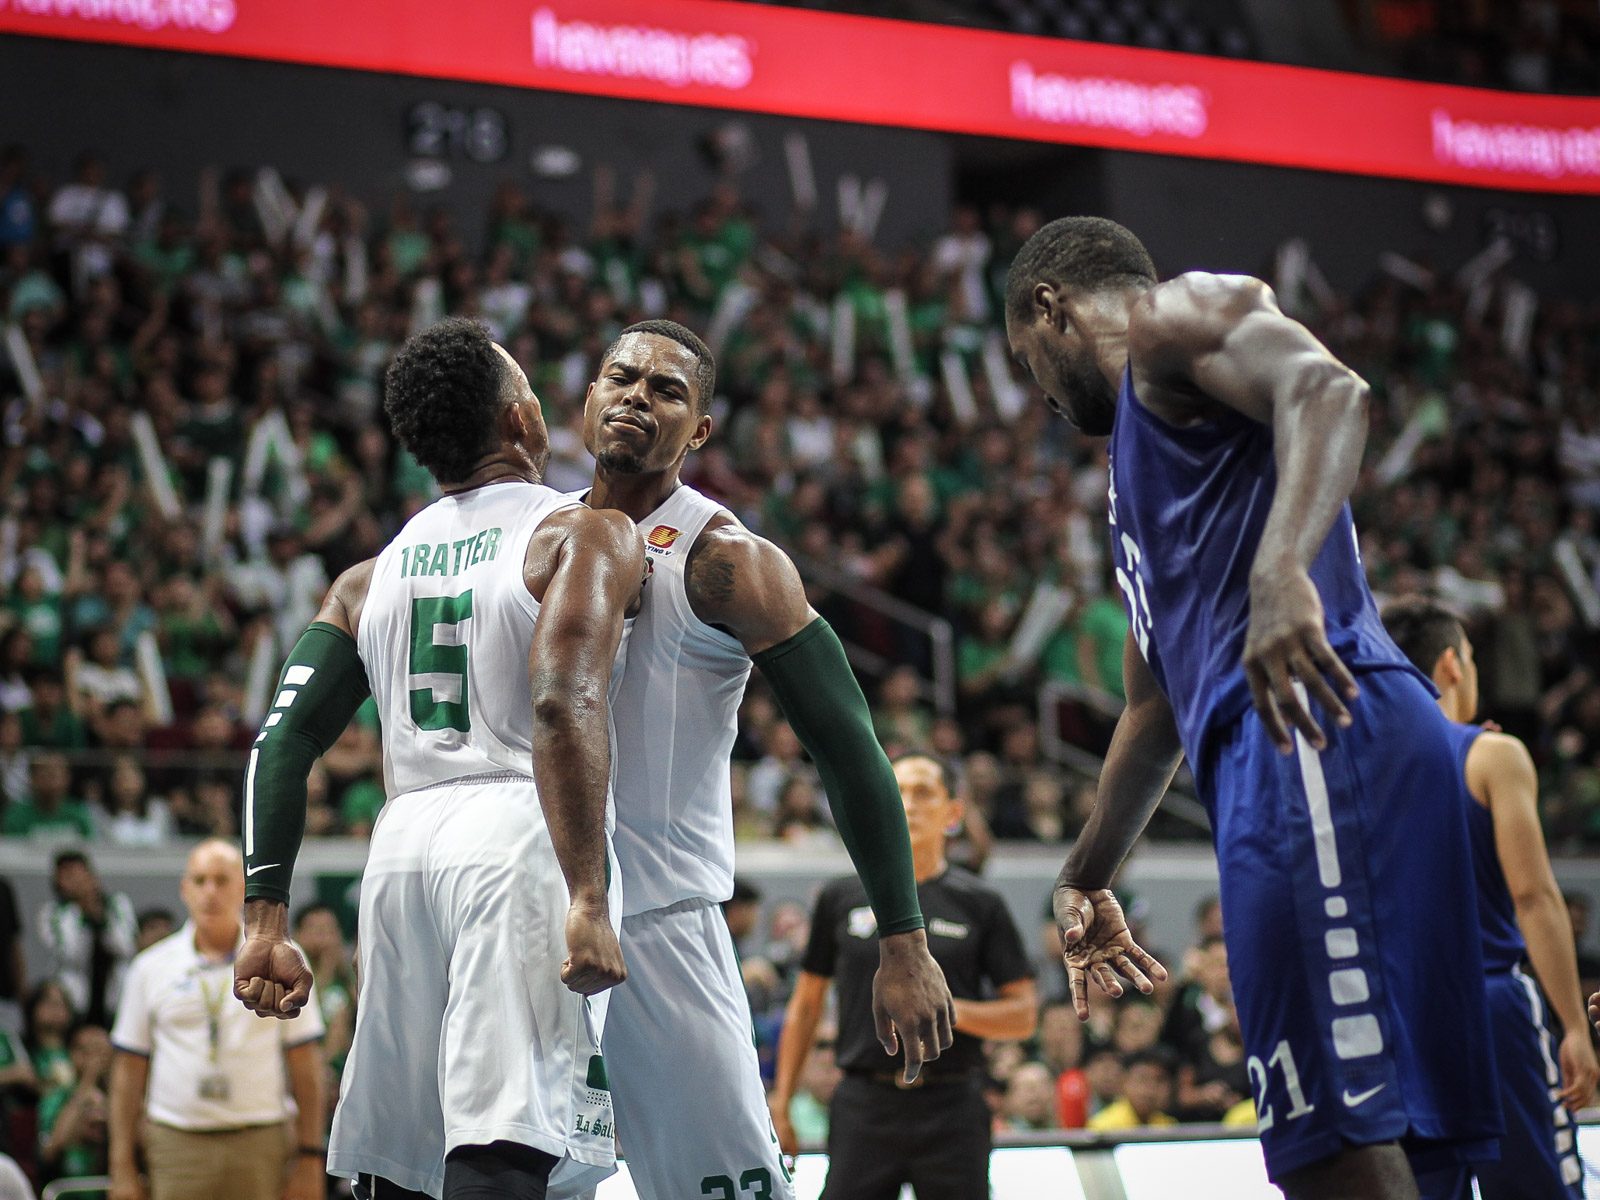 WATCH: La Salle’s Mbala puts on dunking exhibition against Ateneo